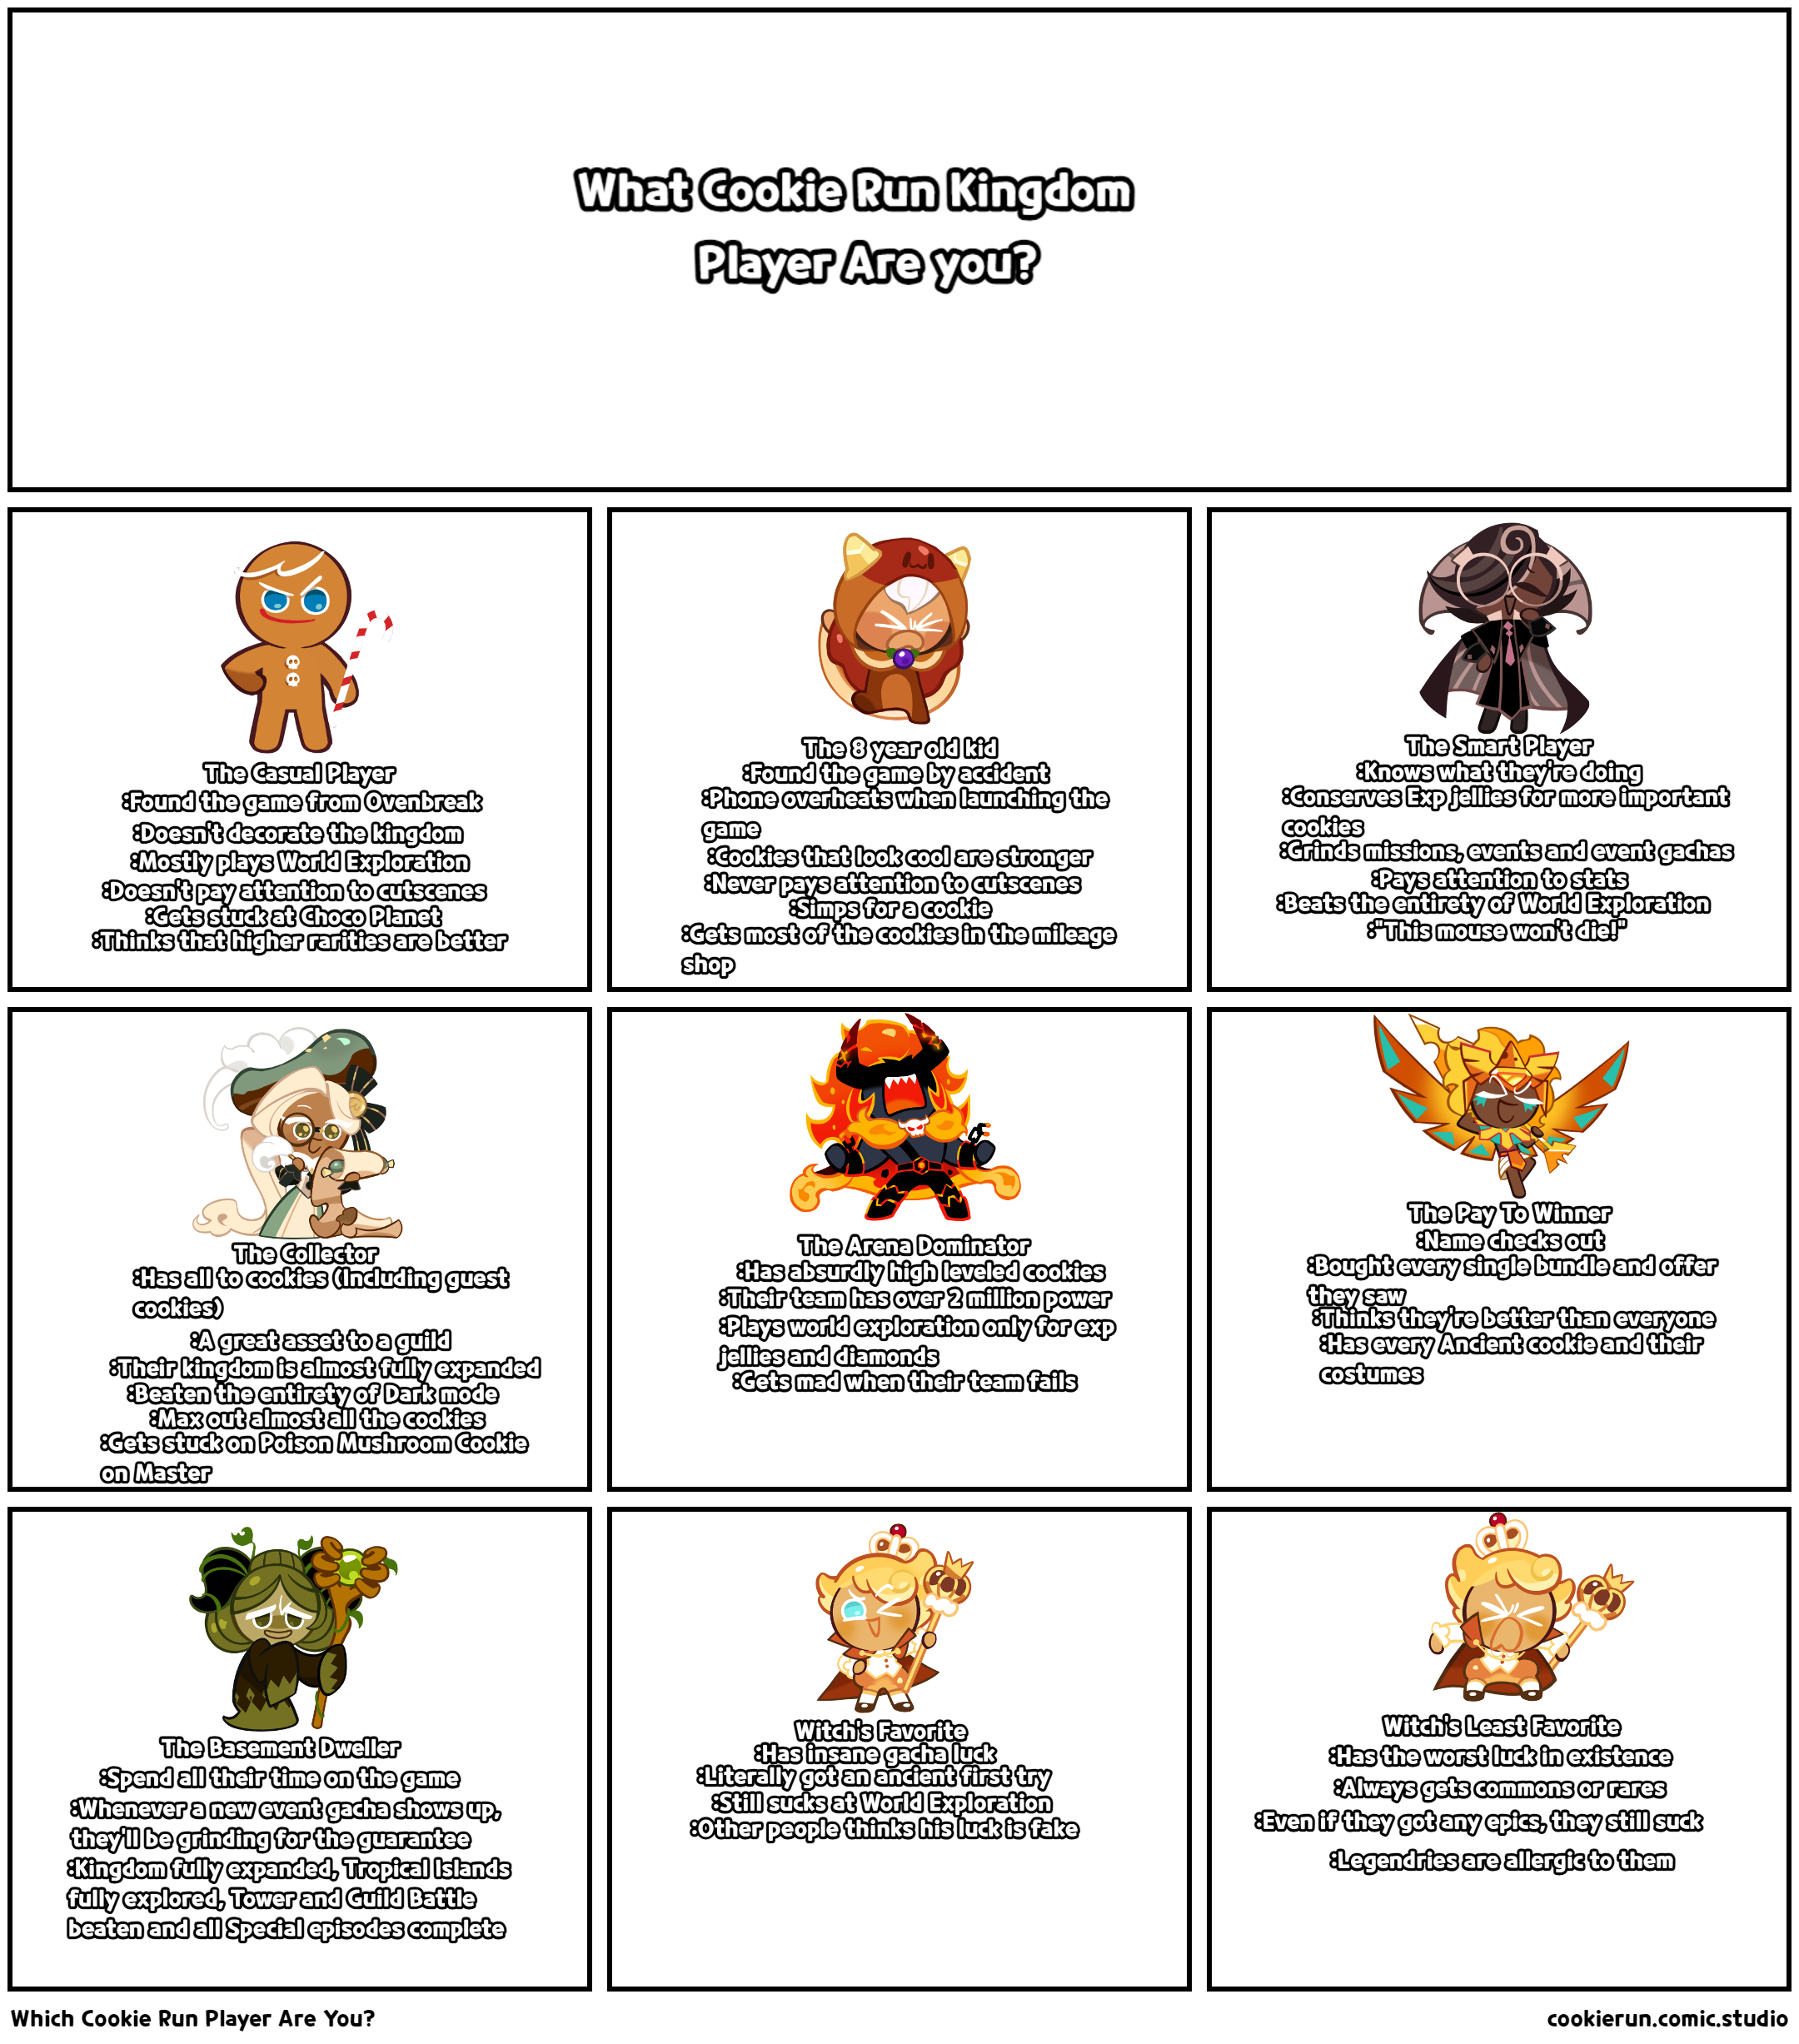 Which Cookie Run Player Are You?